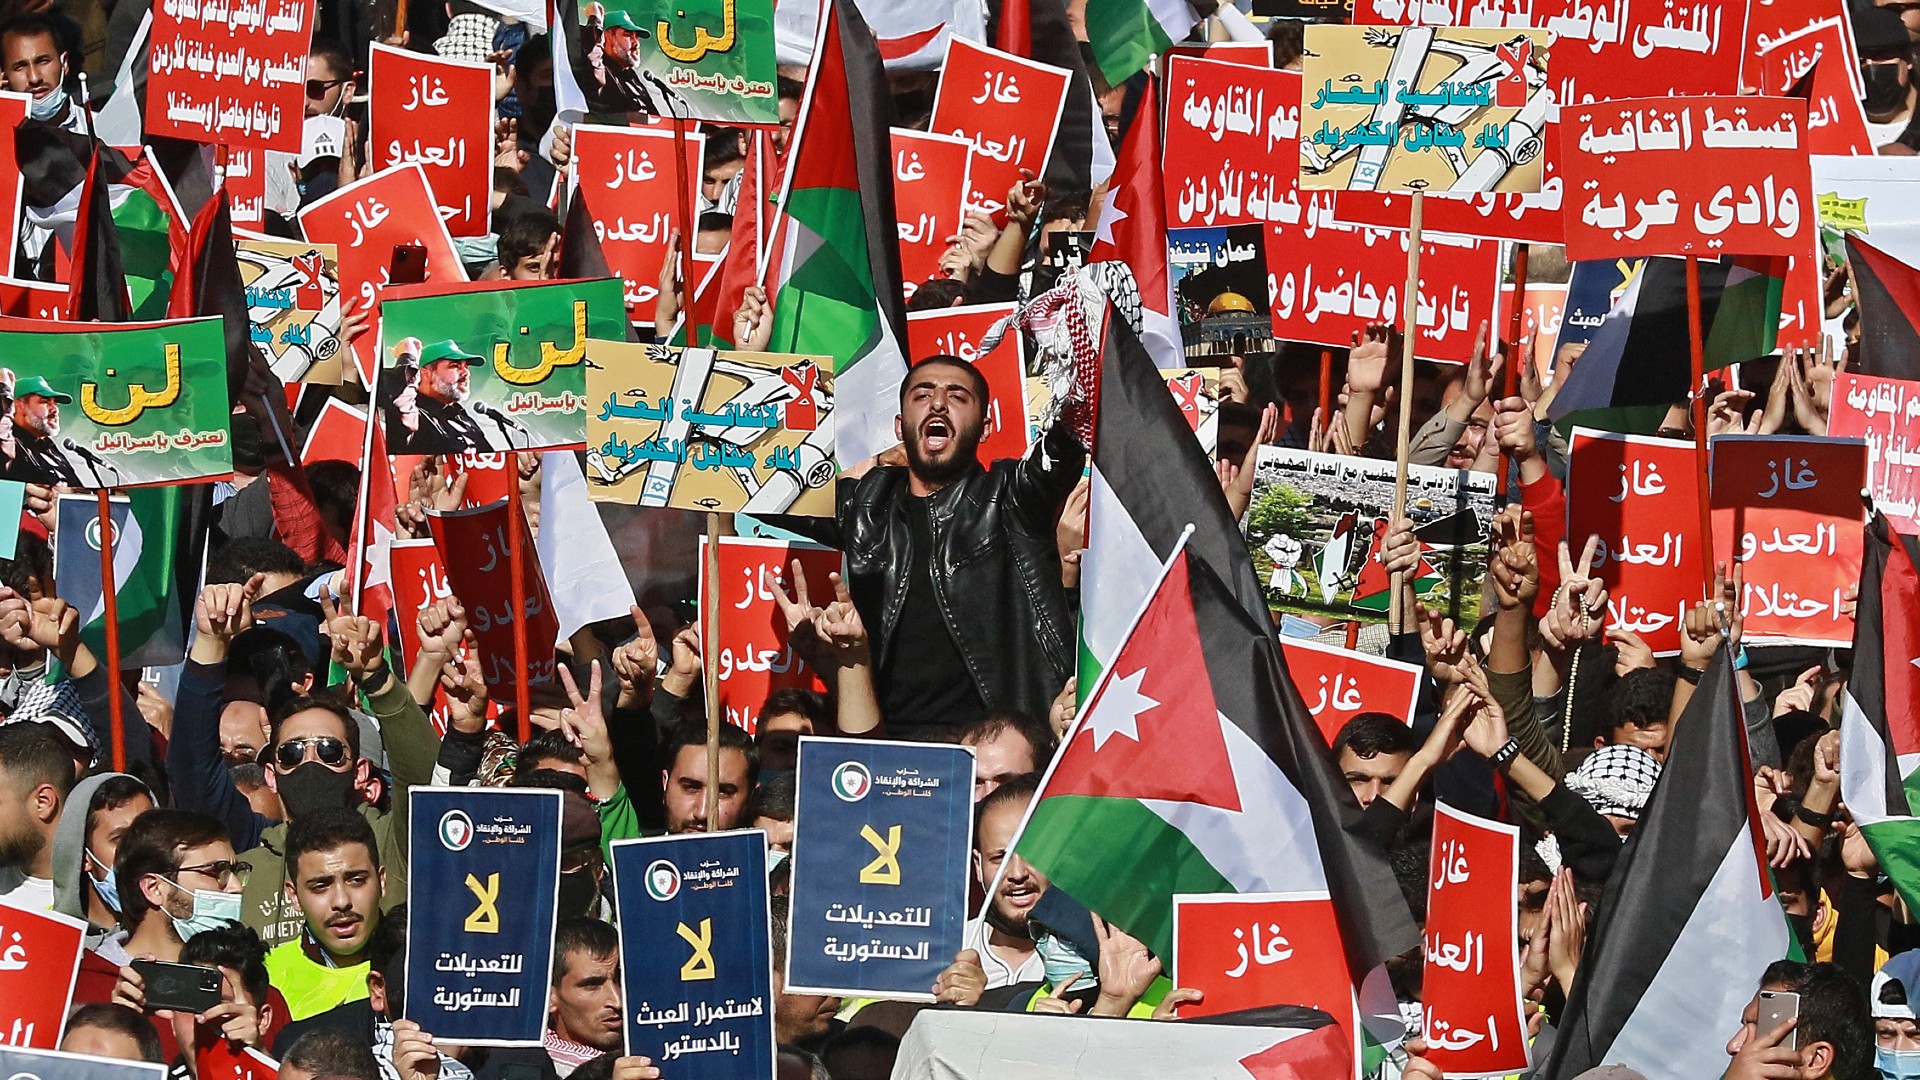 People hold up signs against agreements with Israel and others against constitutional amendment proposals, as hundreds of demonstrators gather in Jordan's capital Amman on November 26, 2021